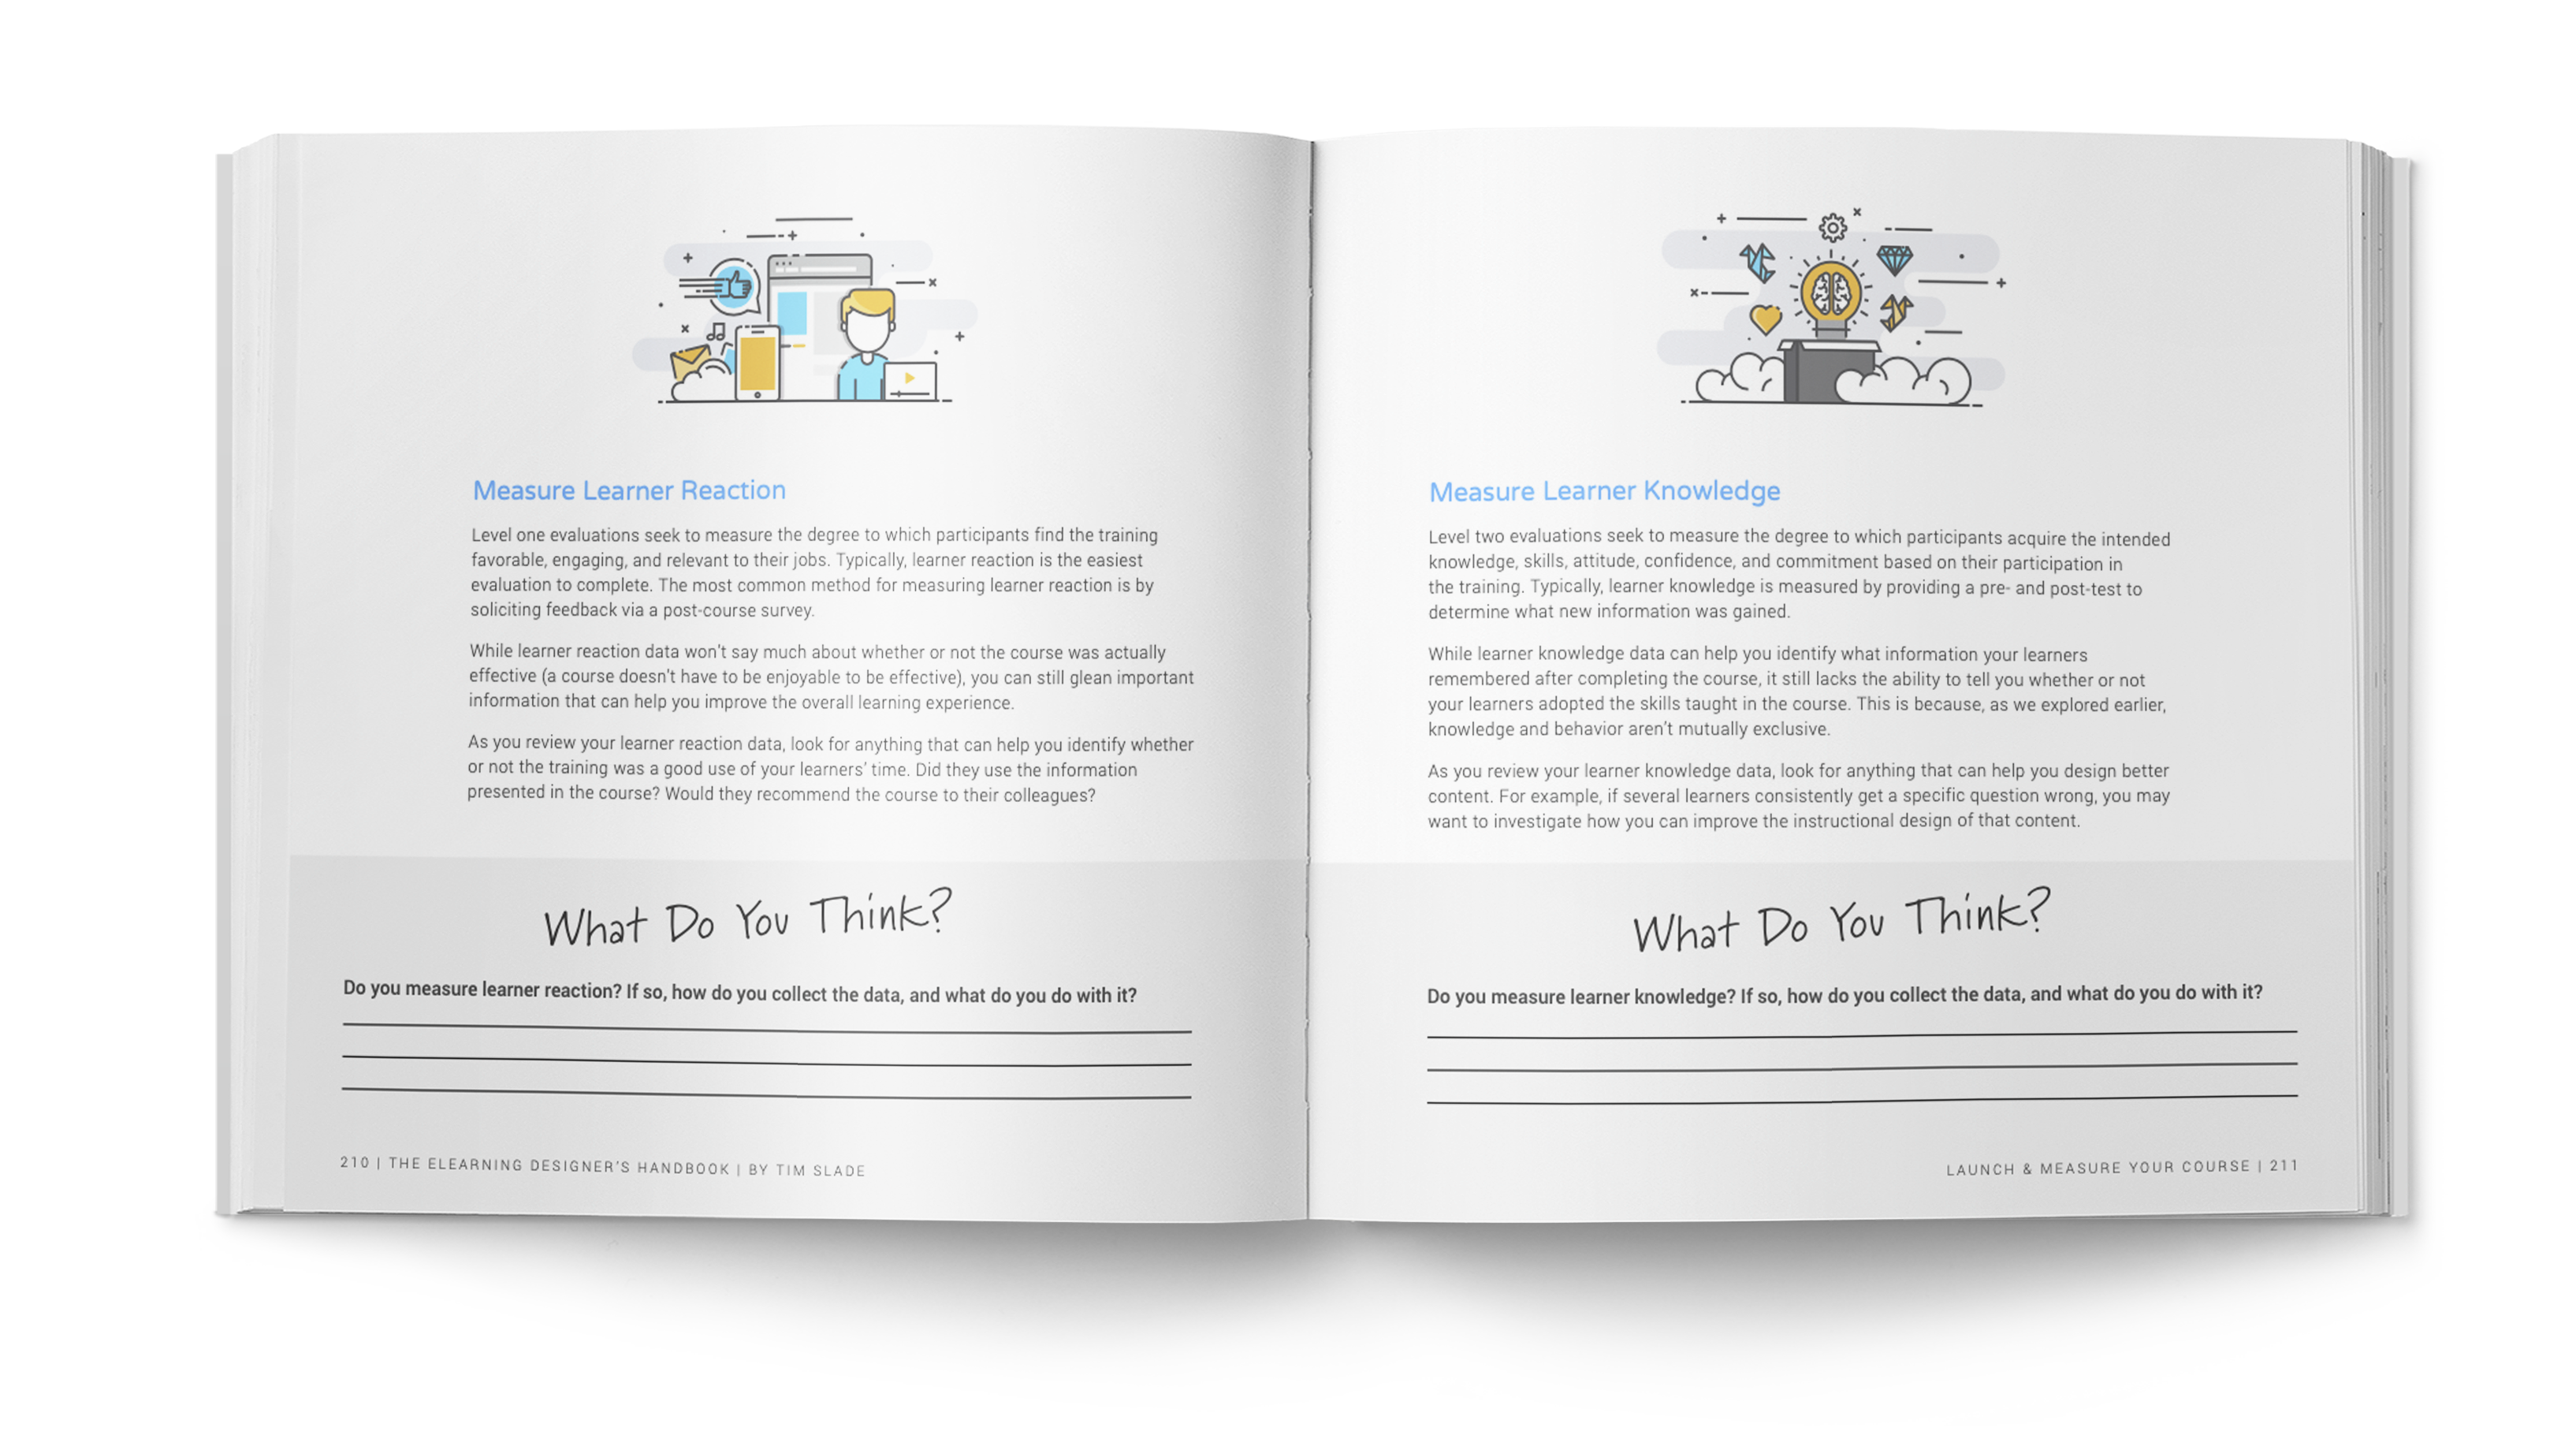 The eLearning Designer's Handbook by Tim Slade | Launch & Measure Your Course | Freelance eLearning Designer | The eLearning Designer's Academy